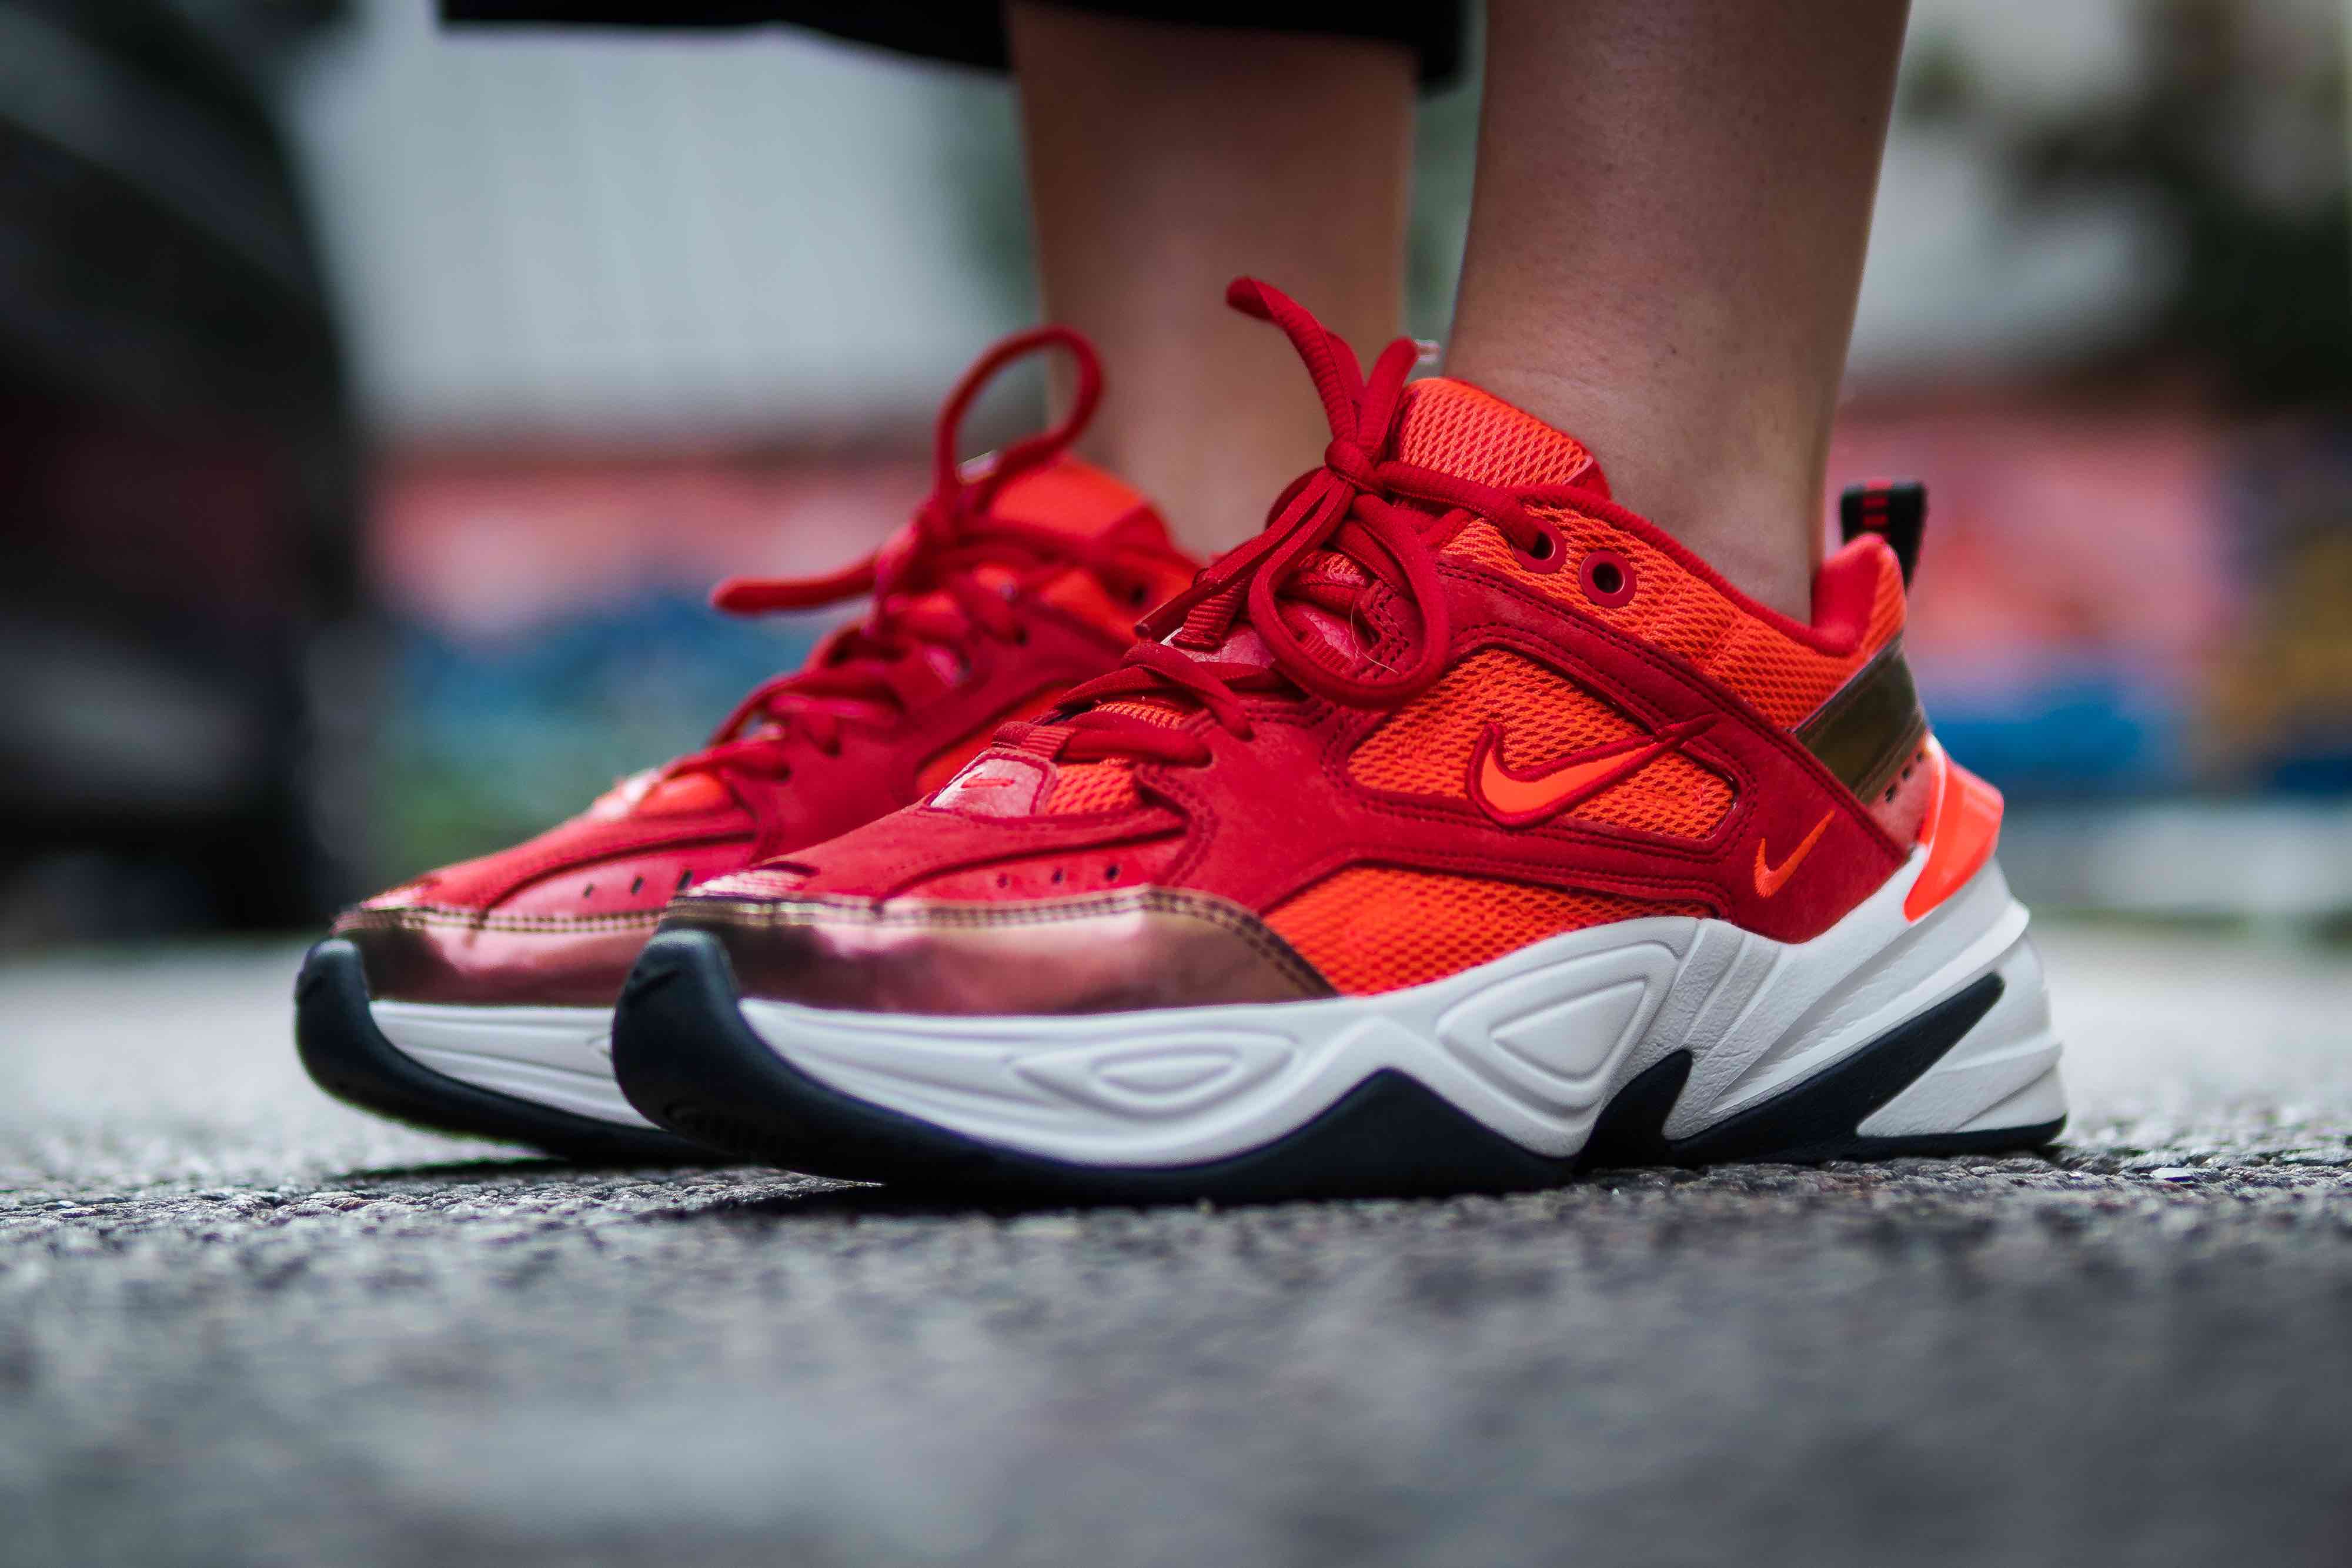 The Sole Womens Twitter: "An Exclusive On Foot At The Nike M2K Tekno 'Rich Clash' https://t.co/olqkWrJCl8 https://t.co/hNt7MwOdDJ" / Twitter